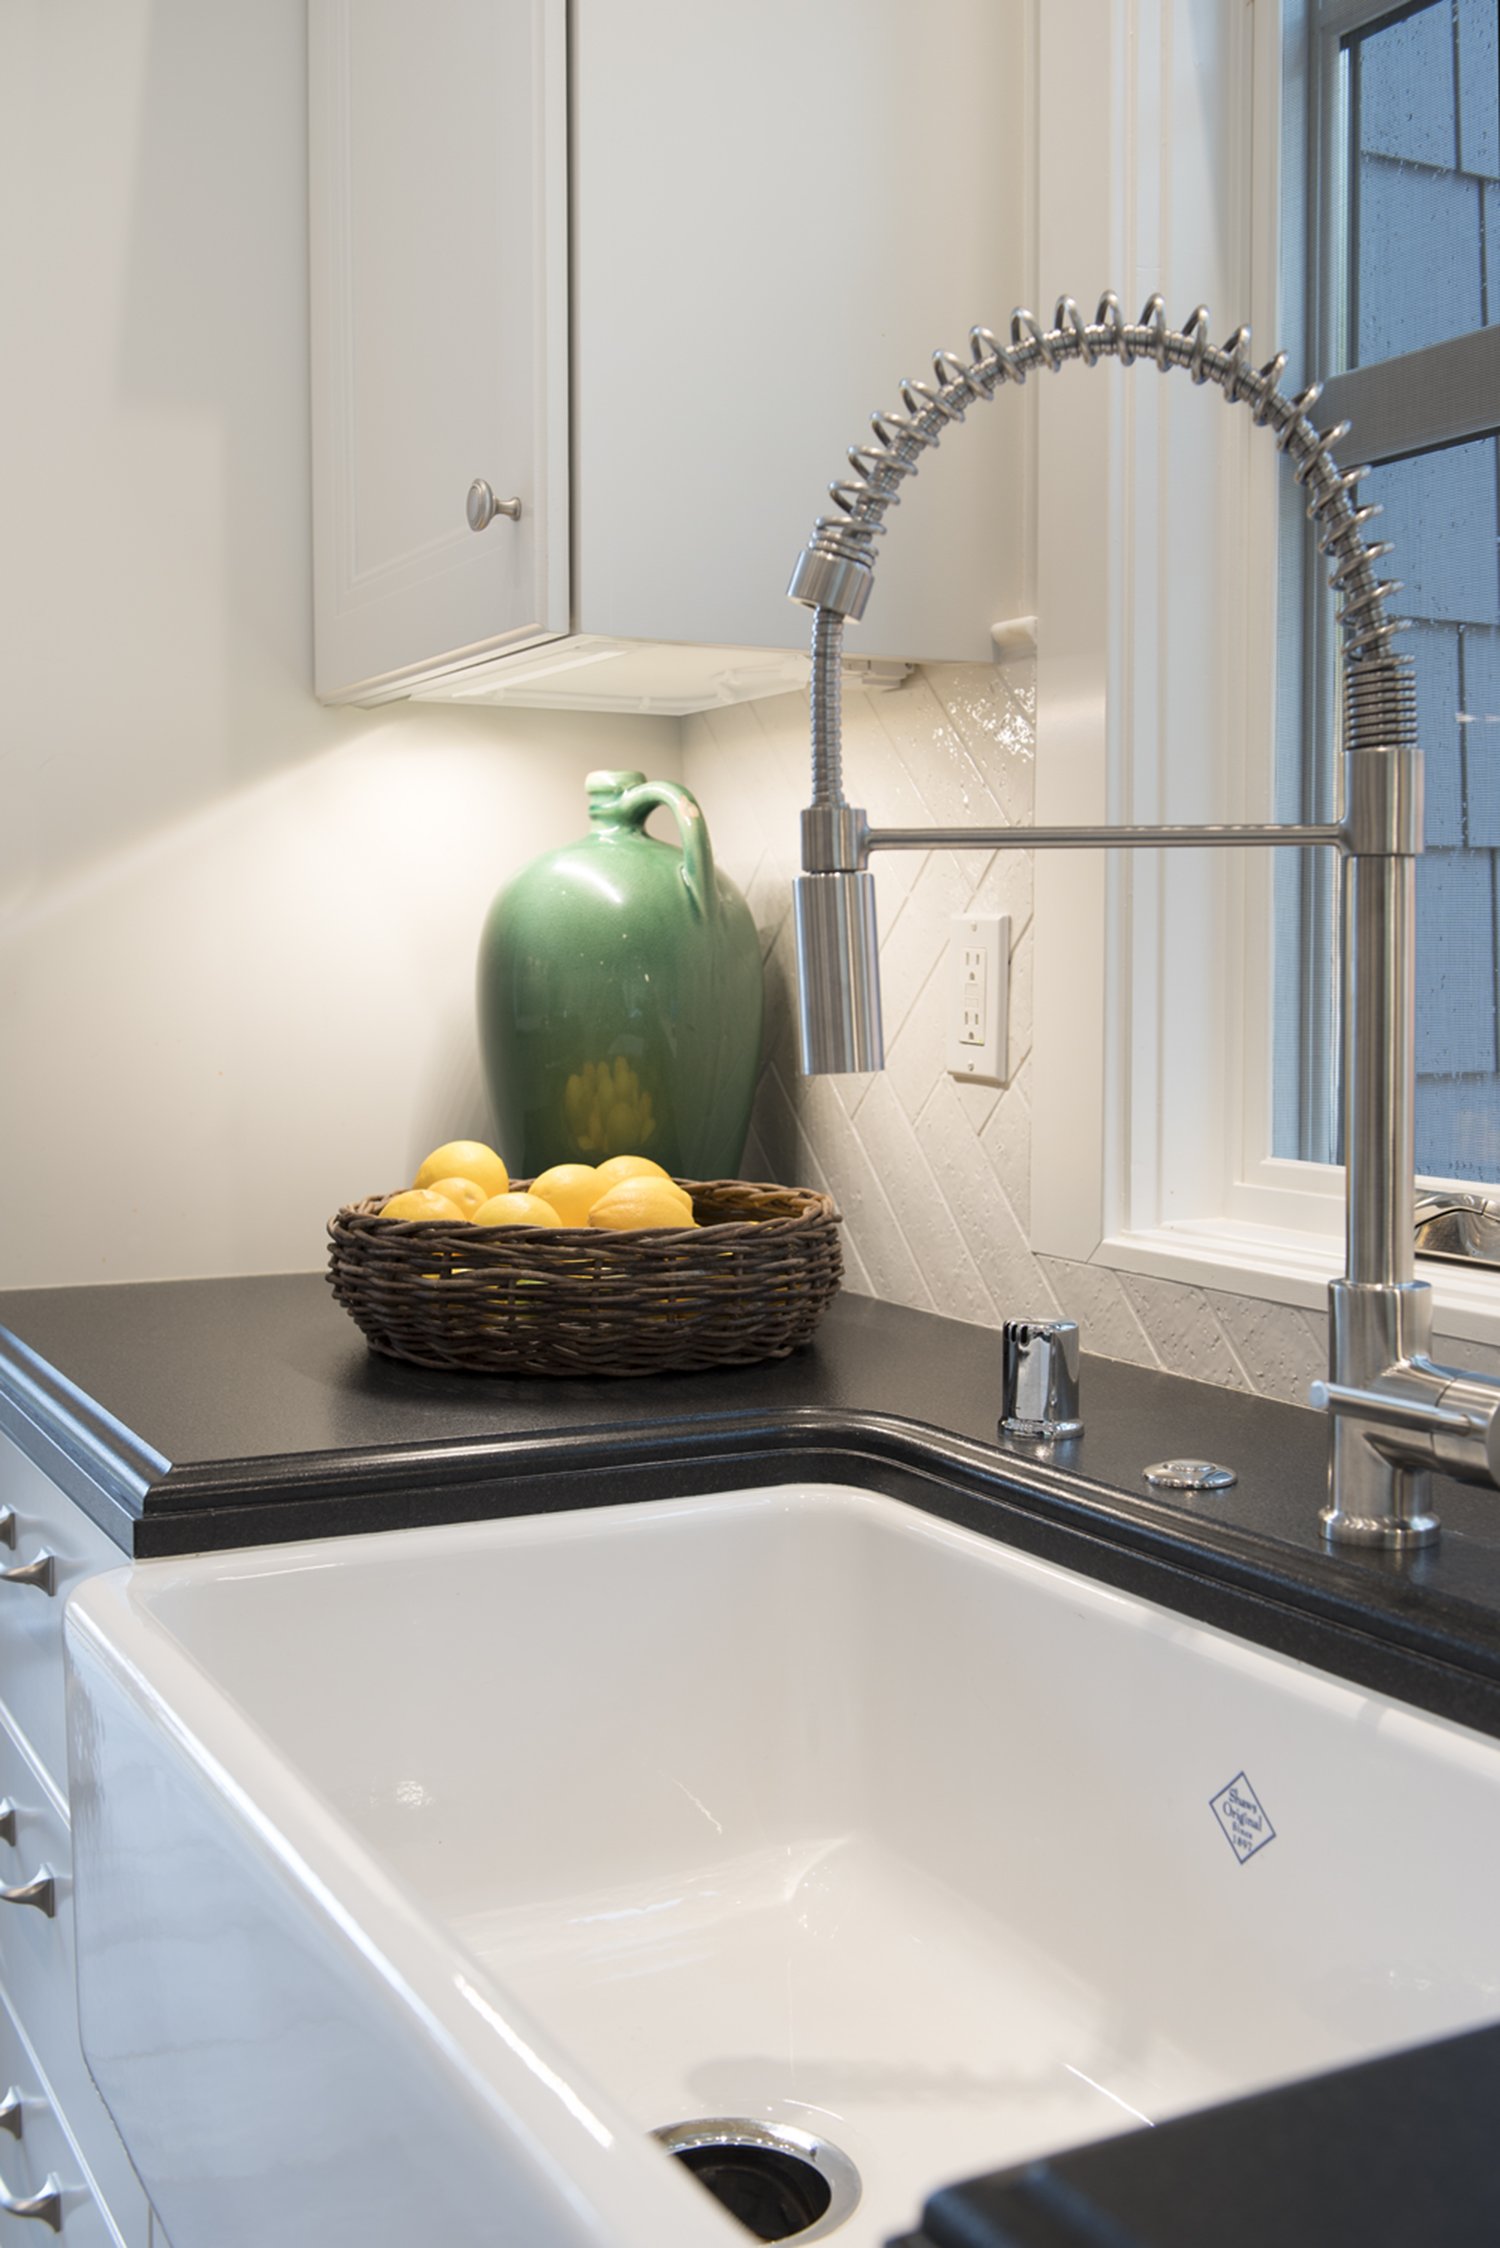  A close up of a farmhouse sink with silver fixtures.  